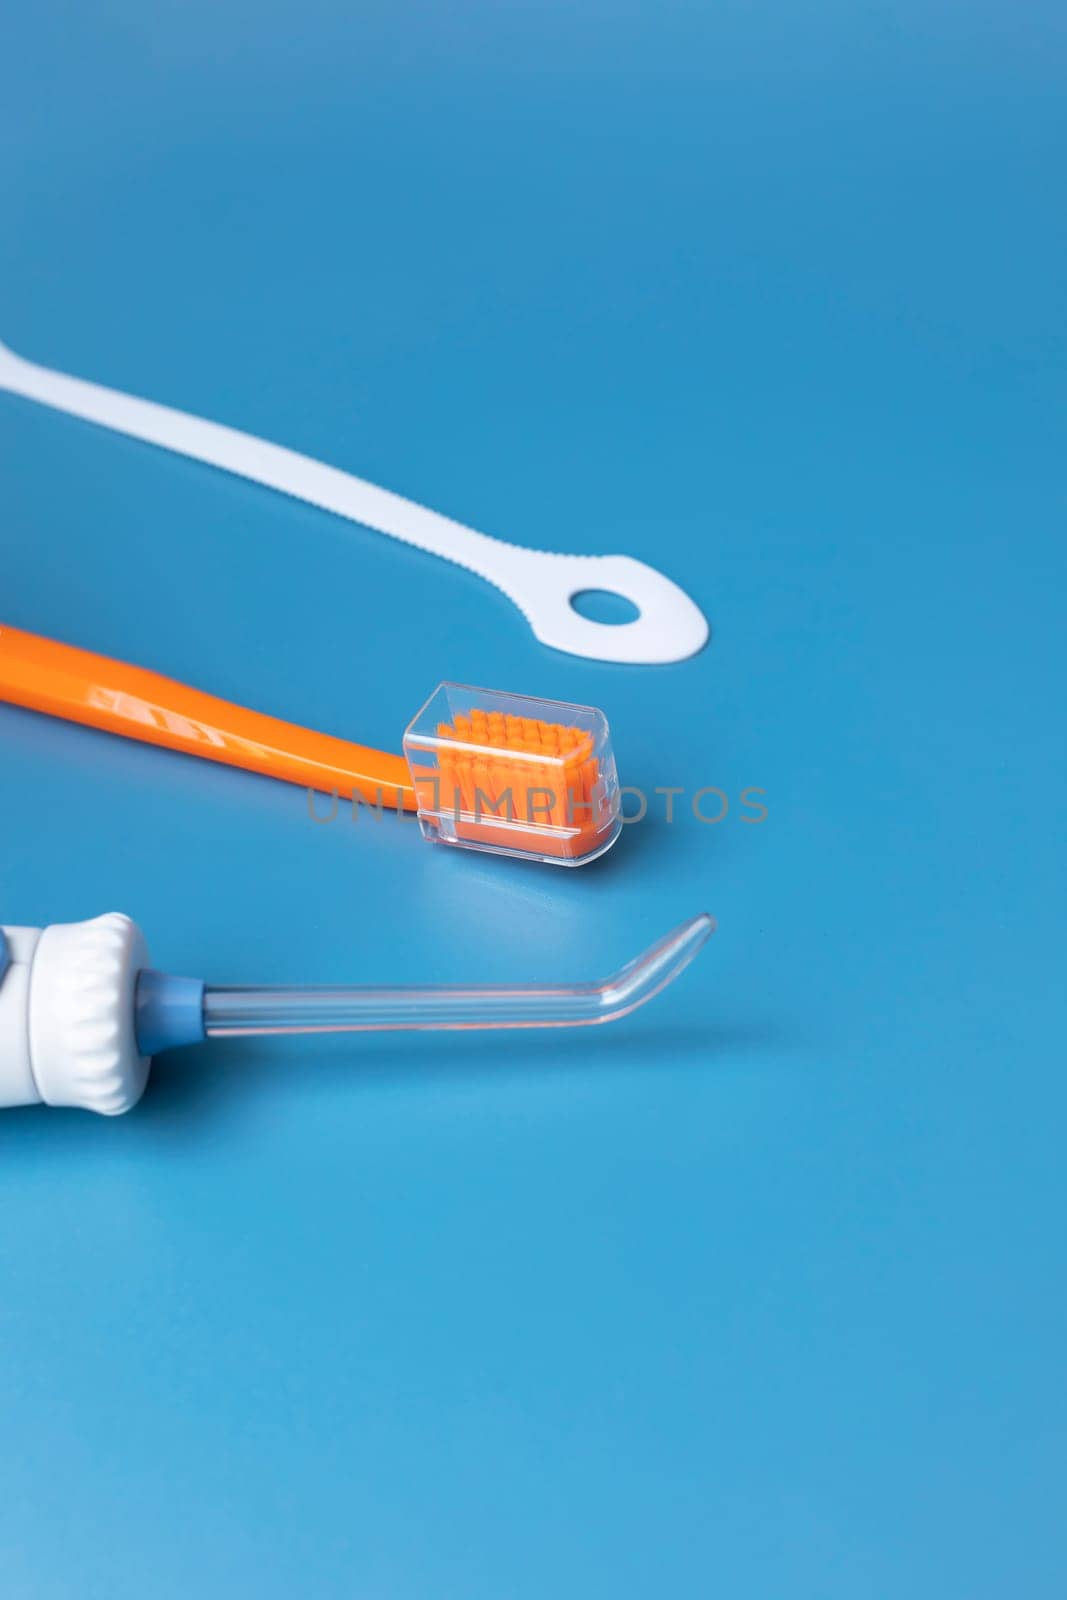 Dental Cleaning Set, Oral Hygiene. Toothbrush, Oral Irrigator, Floss, Tongue Scraper On Blue Background. Flat Lay Of Dental Care Tools, Tooth Hygienic Equipment. Vertical Plane. Copy Space For Text